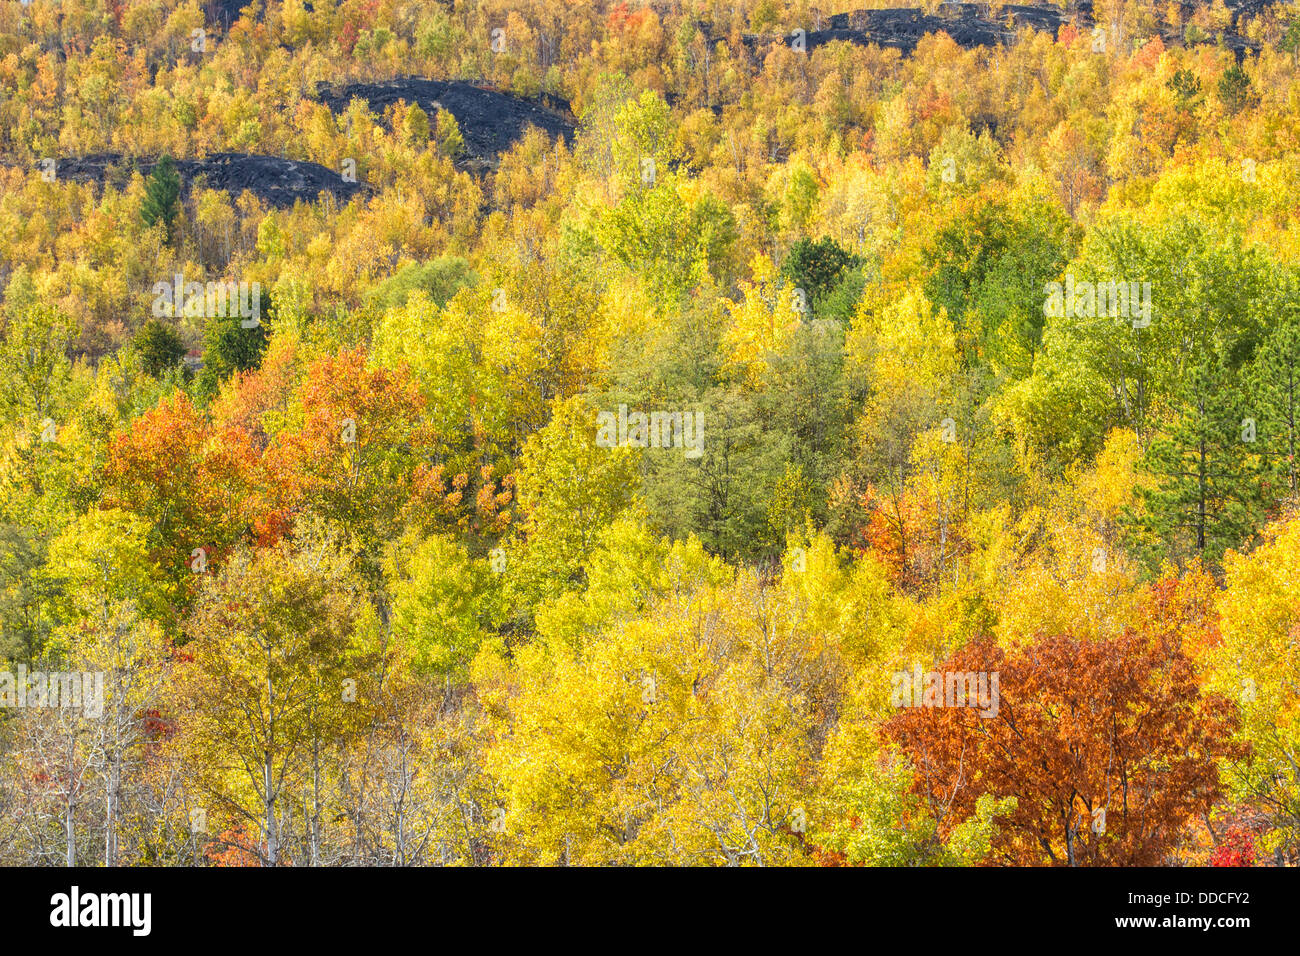 Trees in their autumn glory growing between the rocky hills of Sudbury, Ontario, Canada. Stock Photo